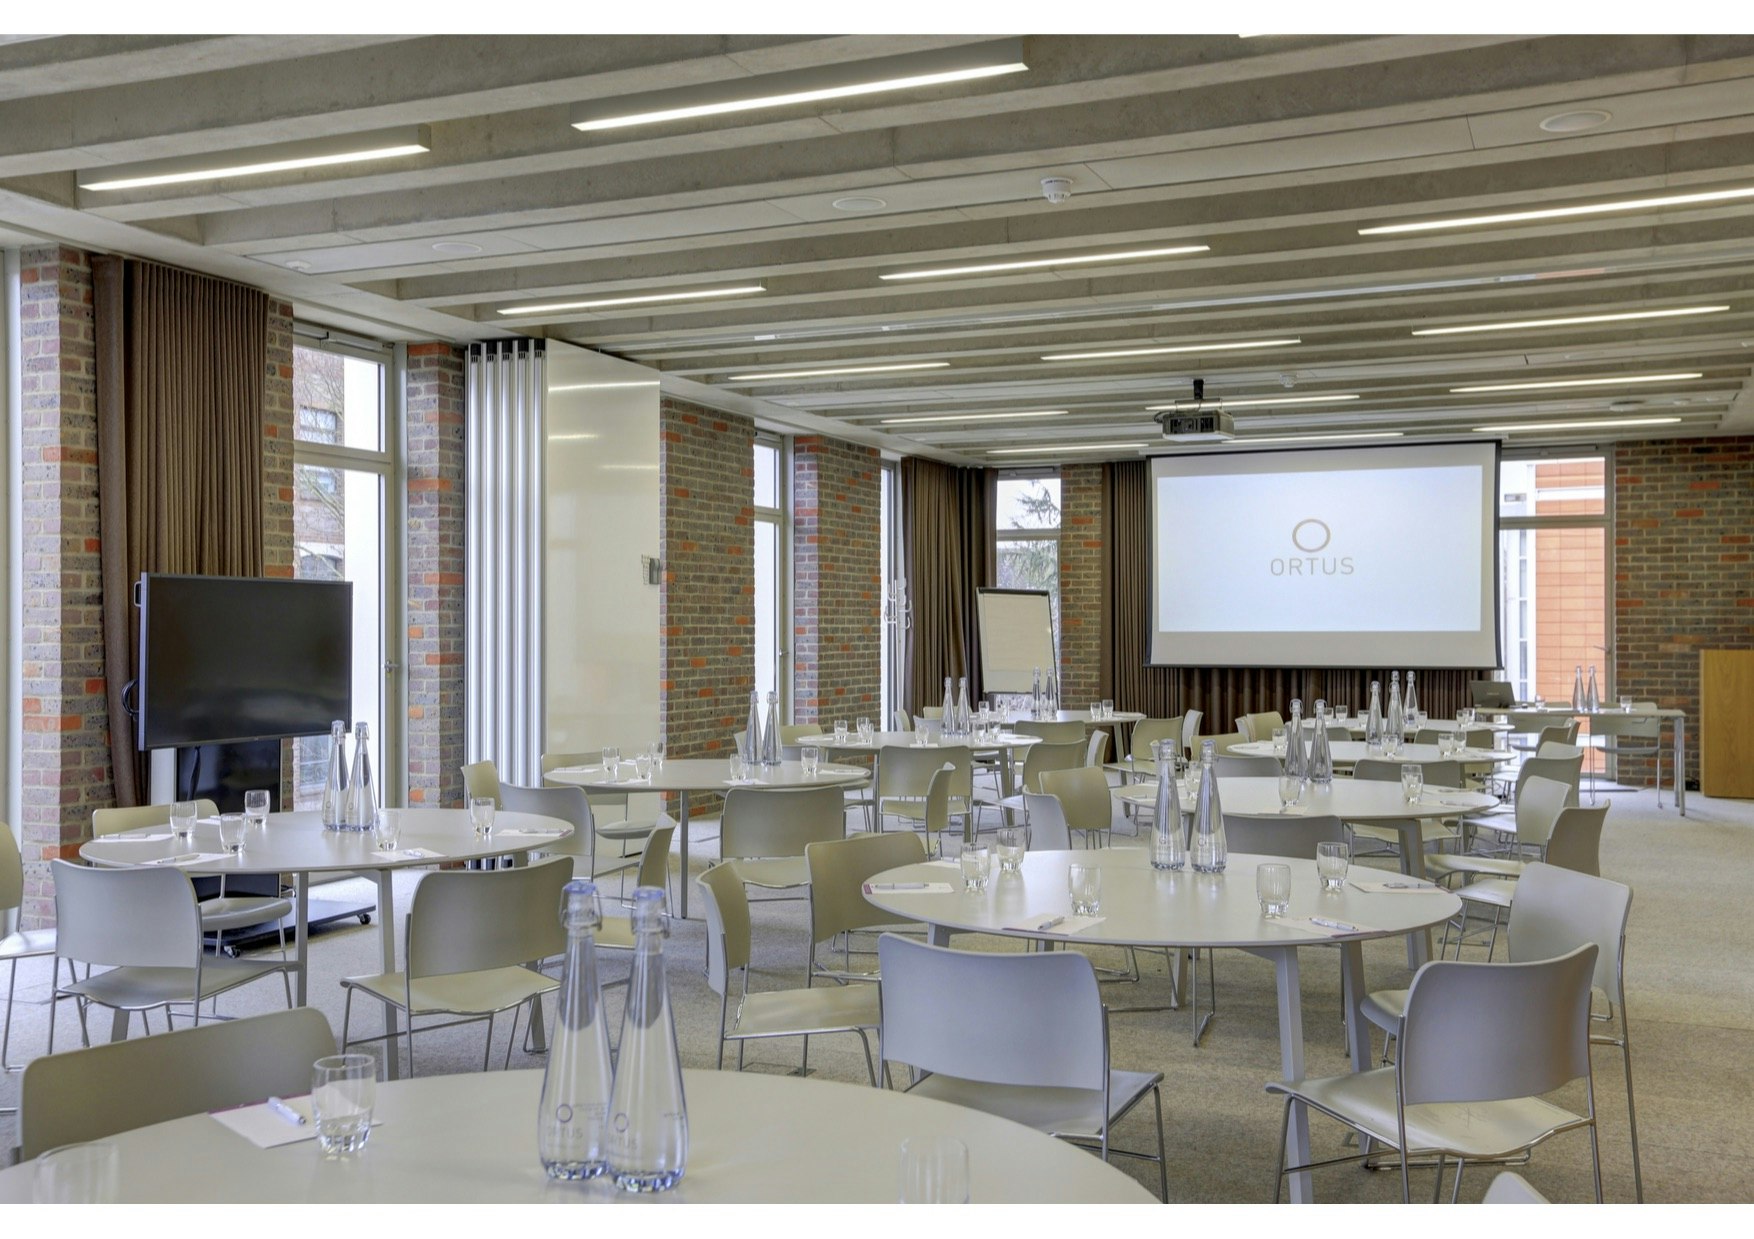 ORTUS Conference and Events Venue - Buddy image 1